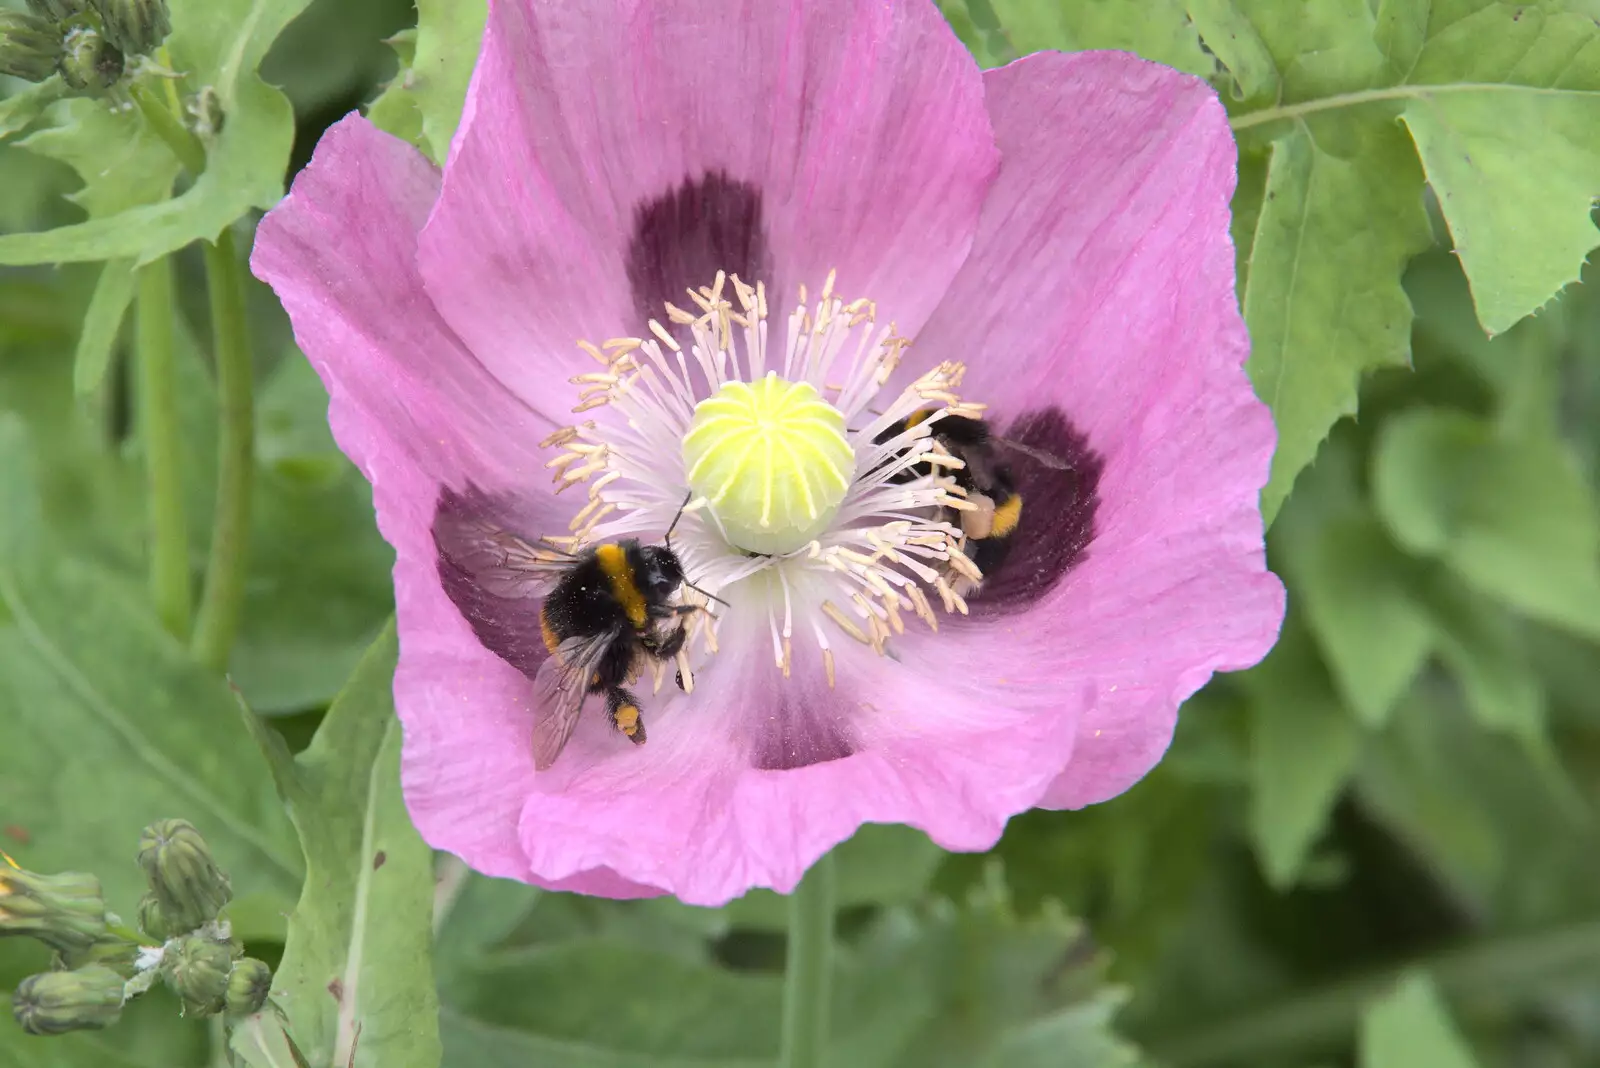 The bees are enjoying the poppies, from Planting a Tree, Town Moors, Eye, Suffolk - 10th July 2021